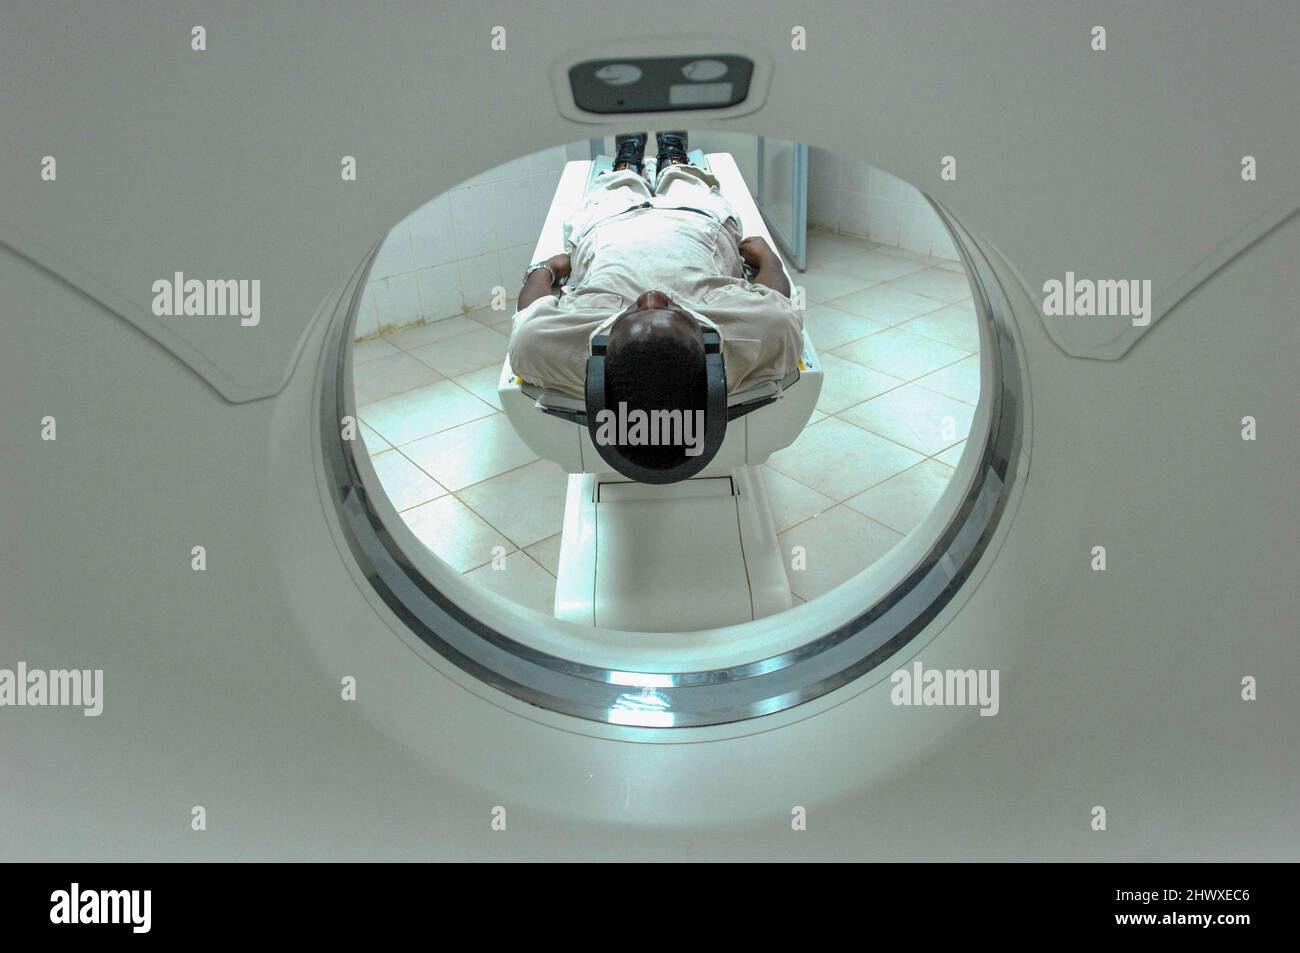 Patient undergoing a CT (Computd Tomography or CAT) scan of his head. Stock Photo